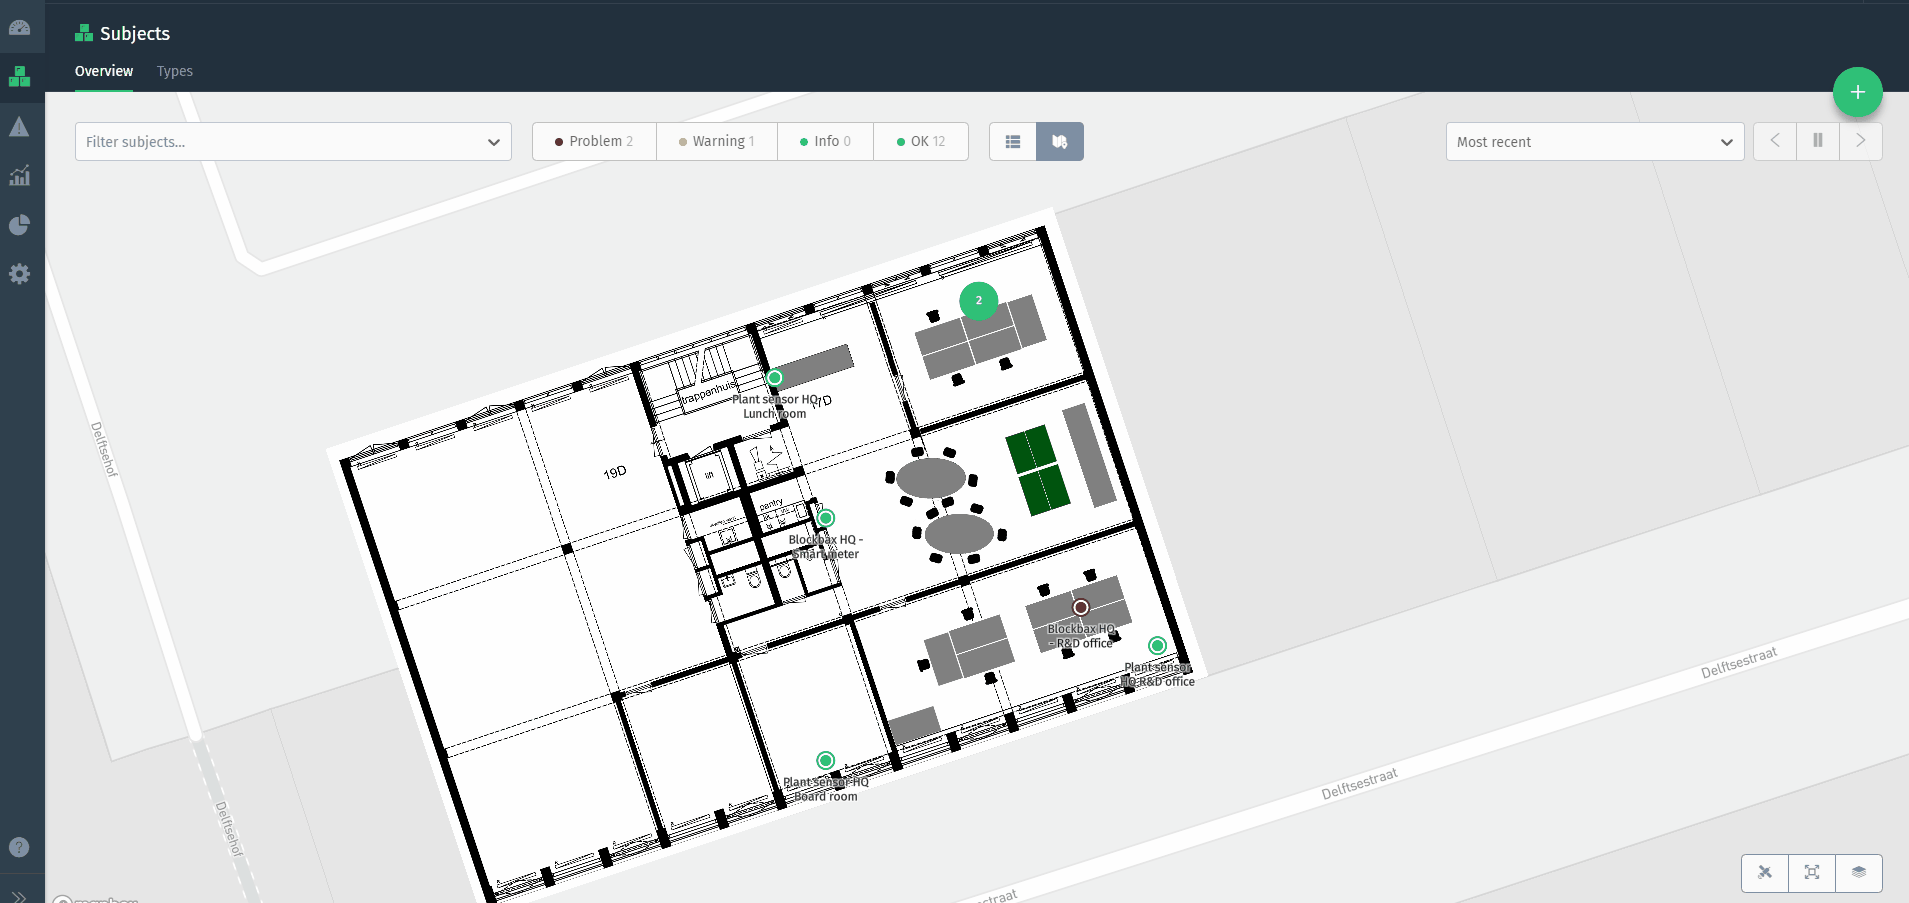 Subjects map view with layer